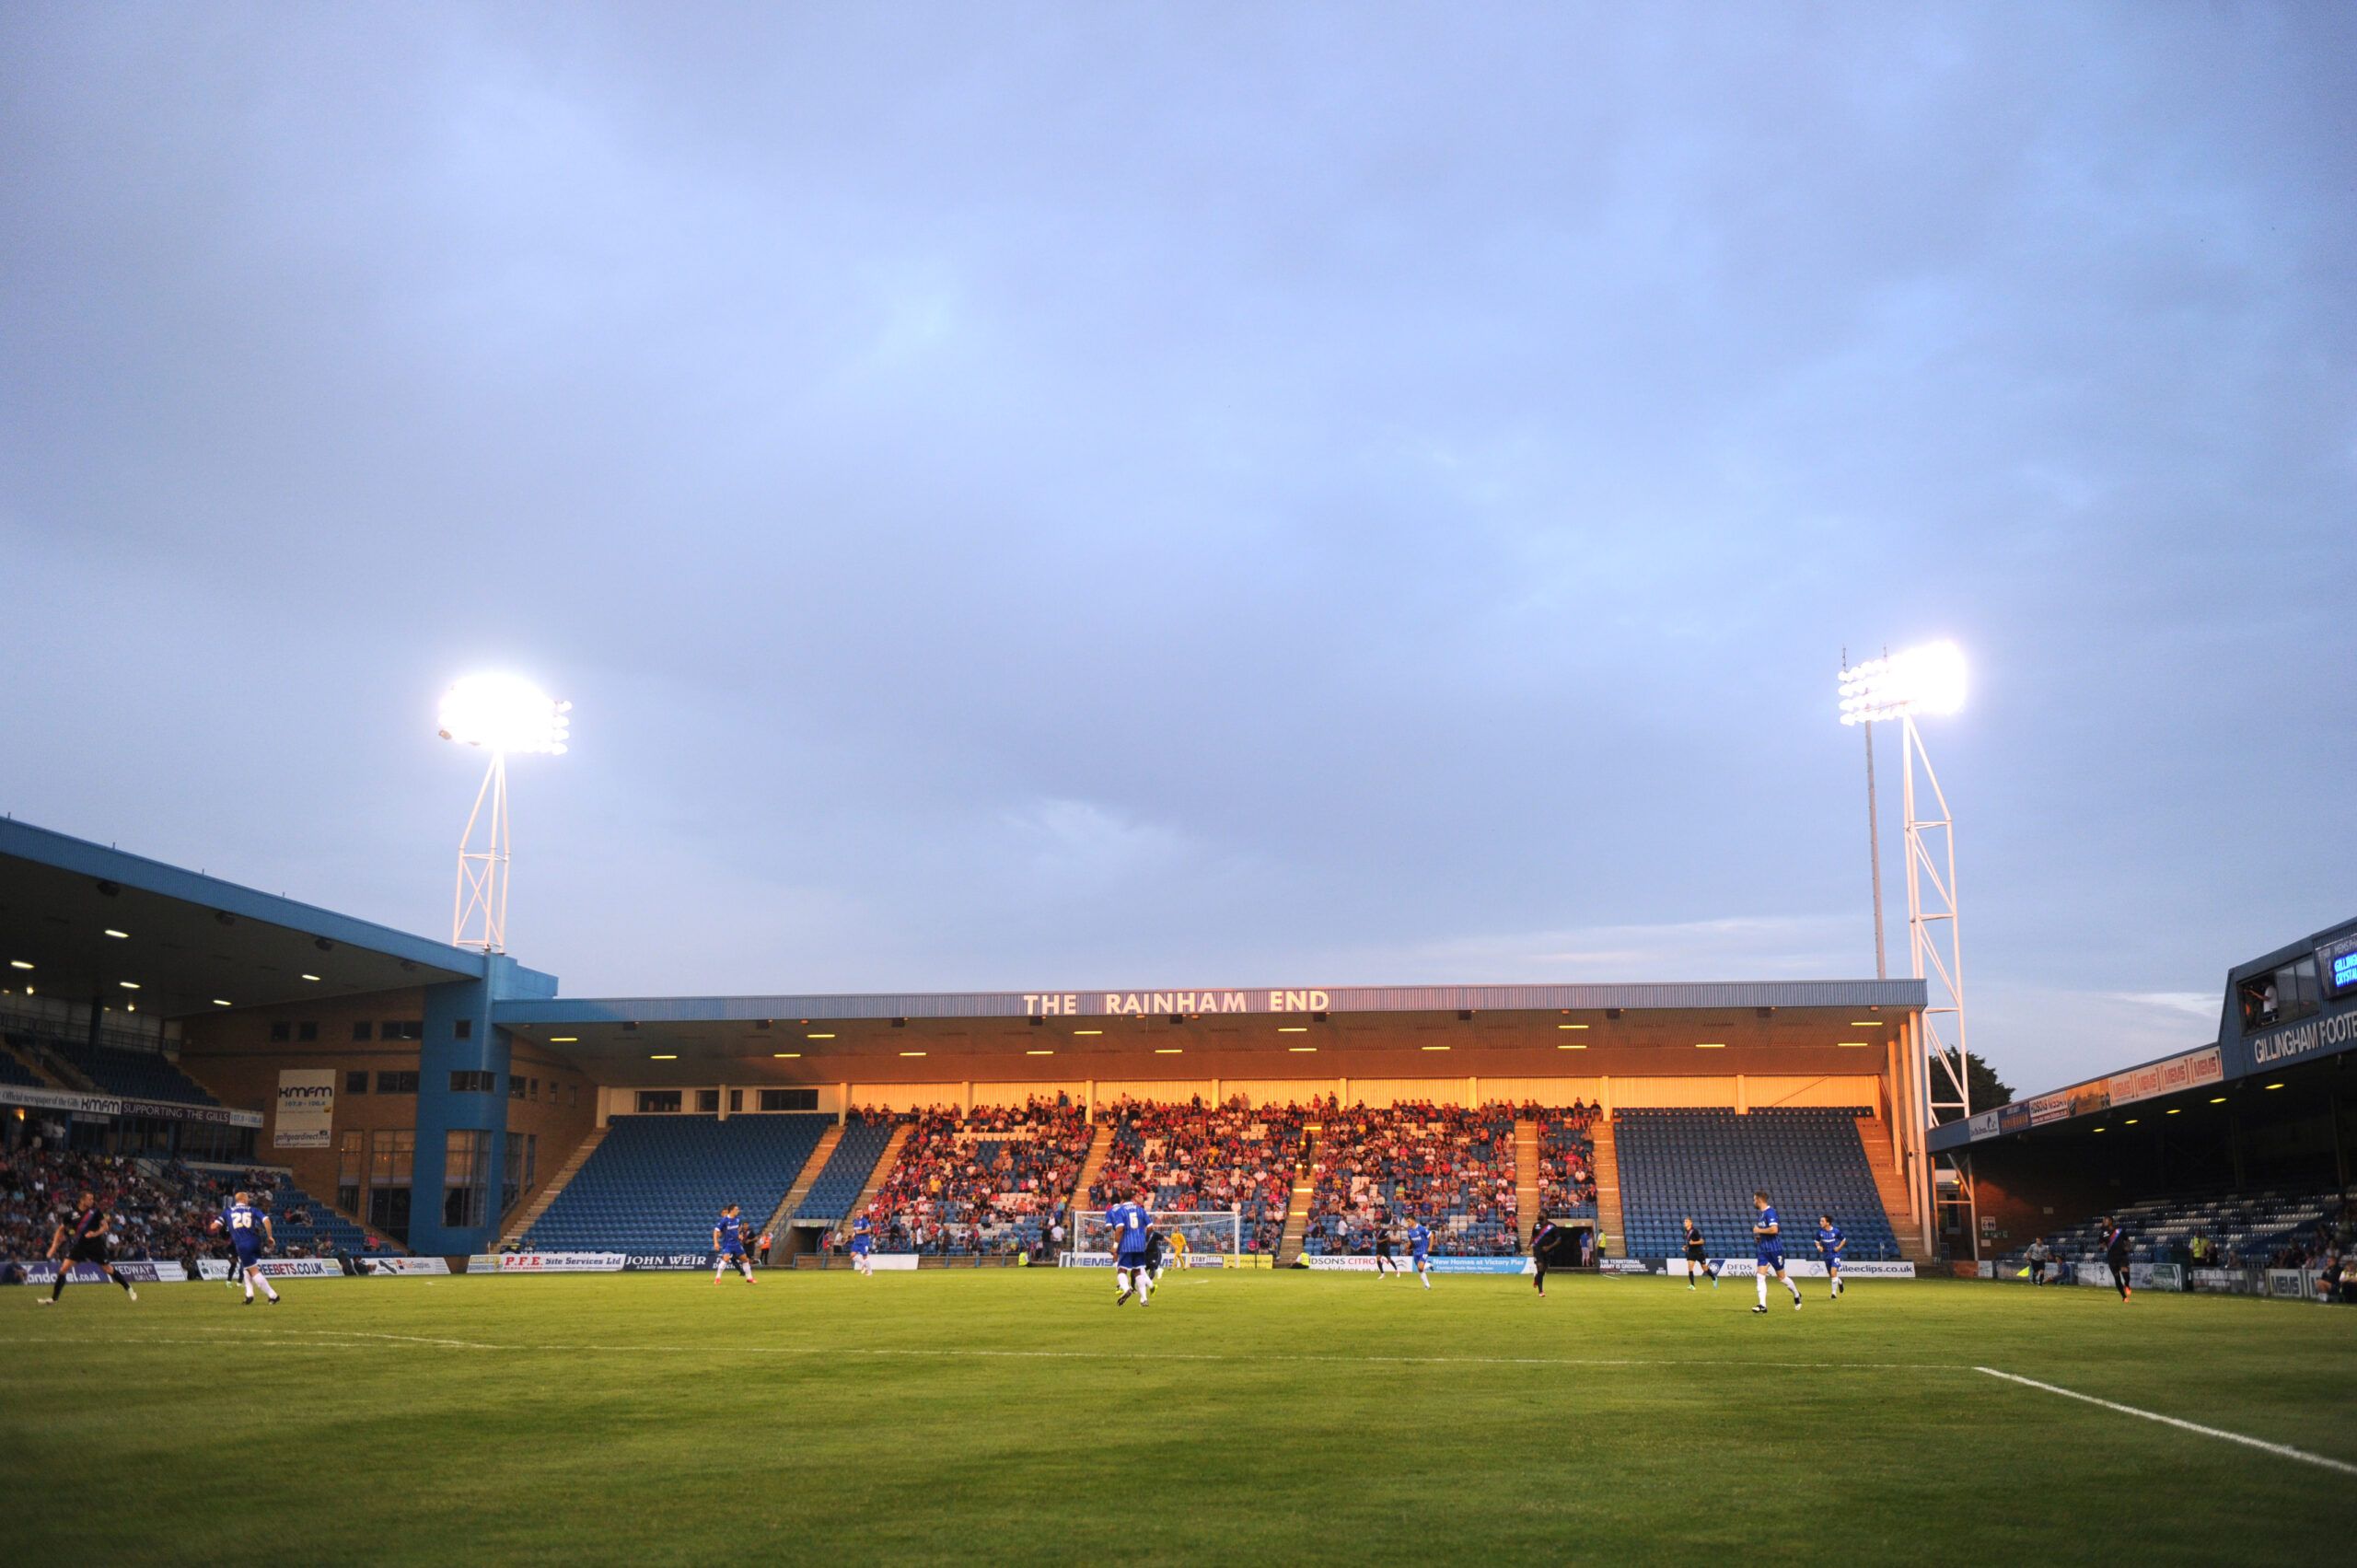 Football - Gillingham v Crystal Palace - Pre Season Friendly - MEMS Priestfield Stadium - 13/14 - 23/7/13 
General view / match action 
Mandatory Credit: Action Images / Tony O'Brien